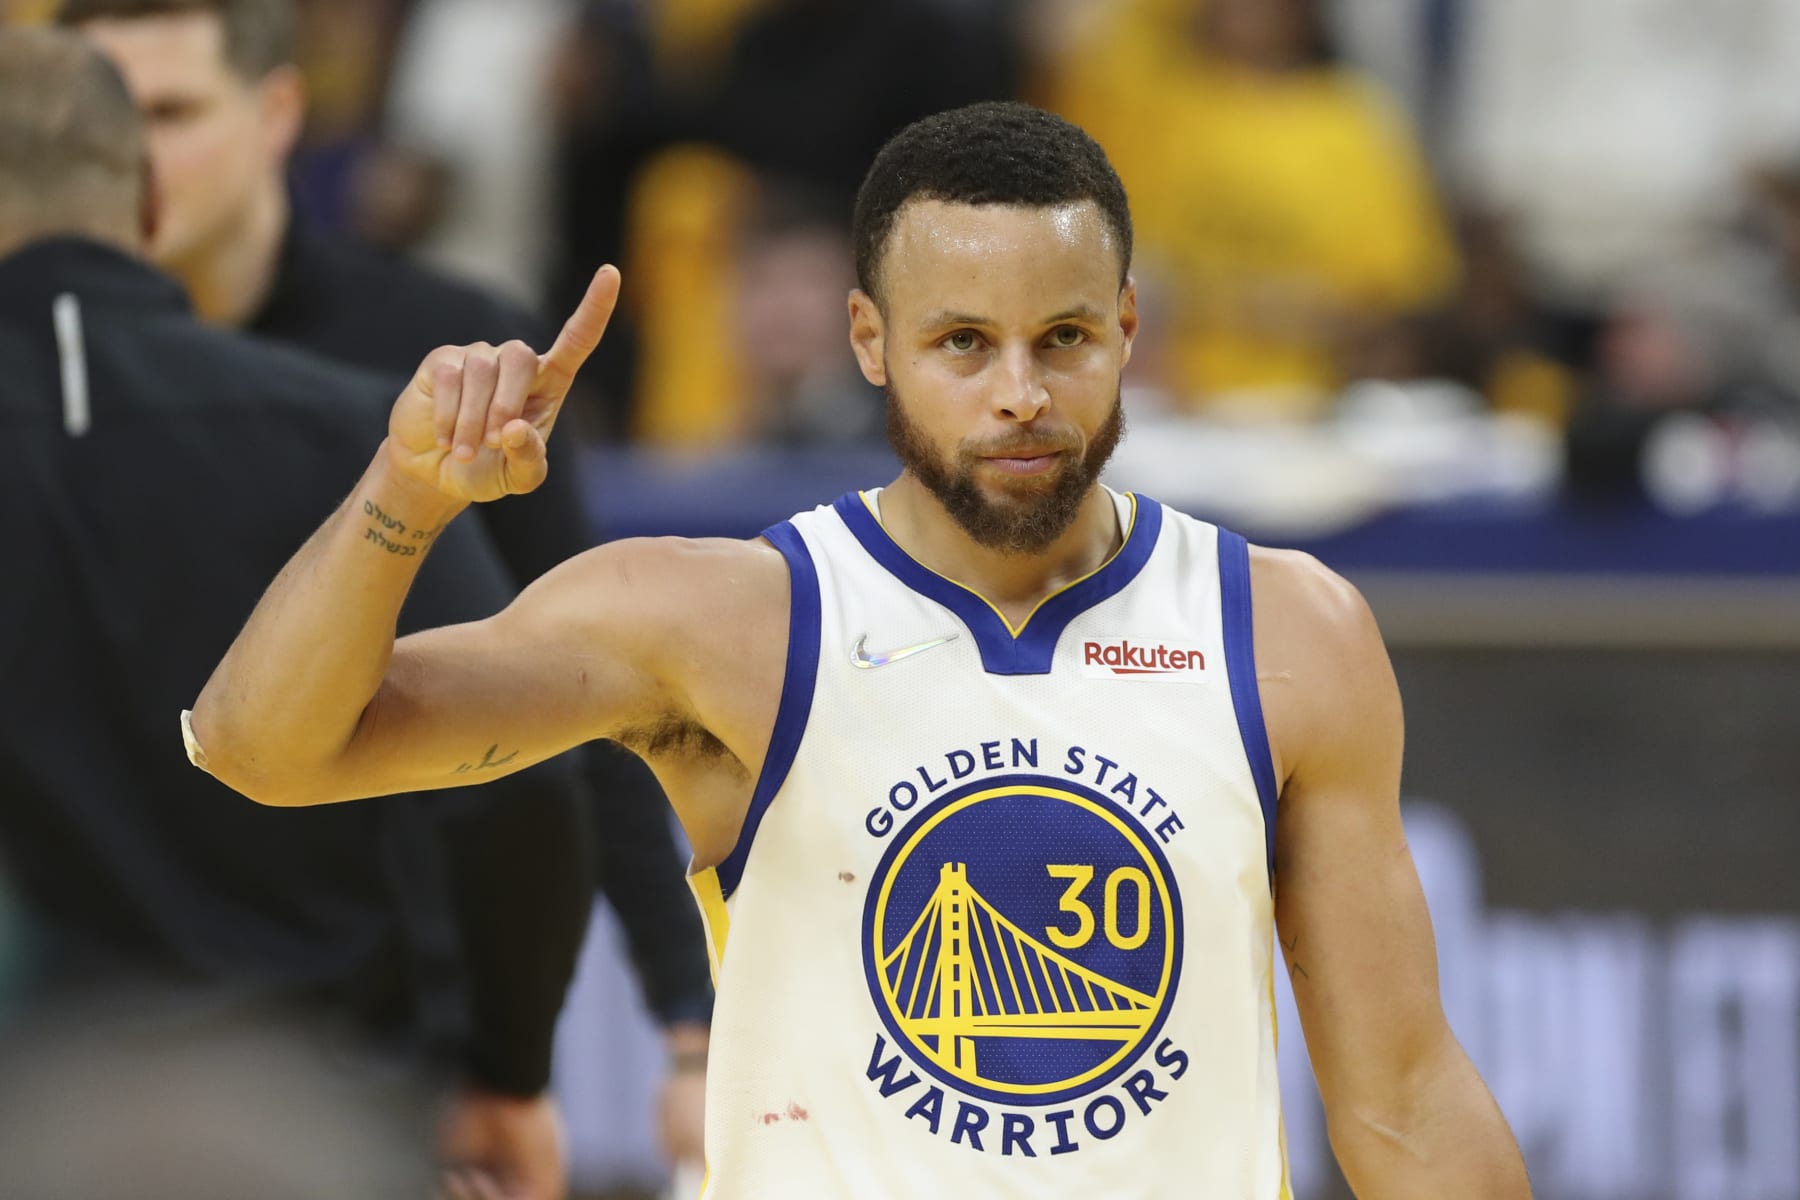 We did it! Every Warriors jersey ever, power ranked